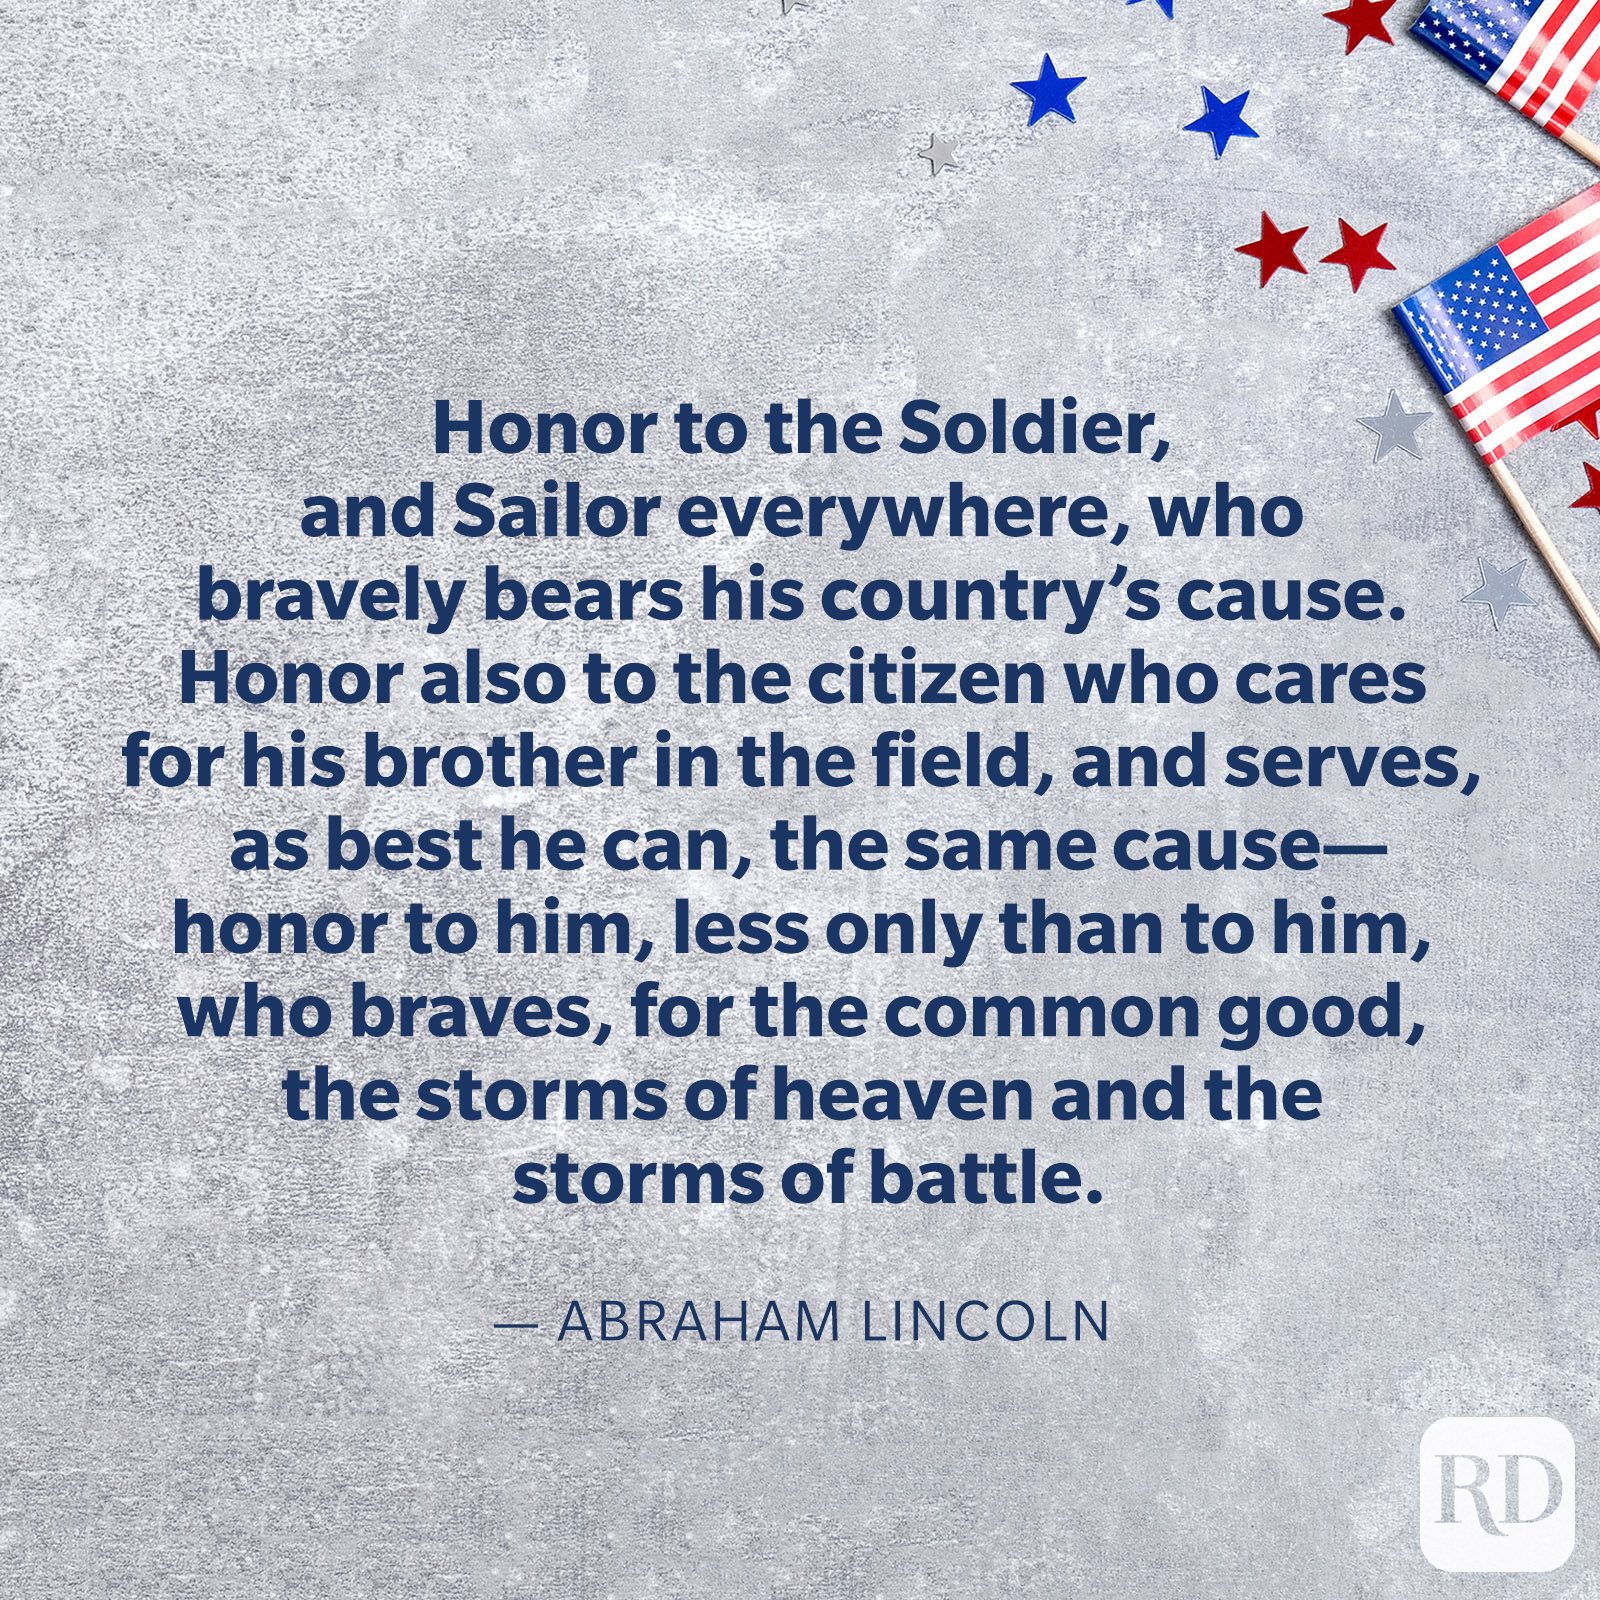 38 Memorial Day Quotes for Memorial Day 2021 | Reader's Digest